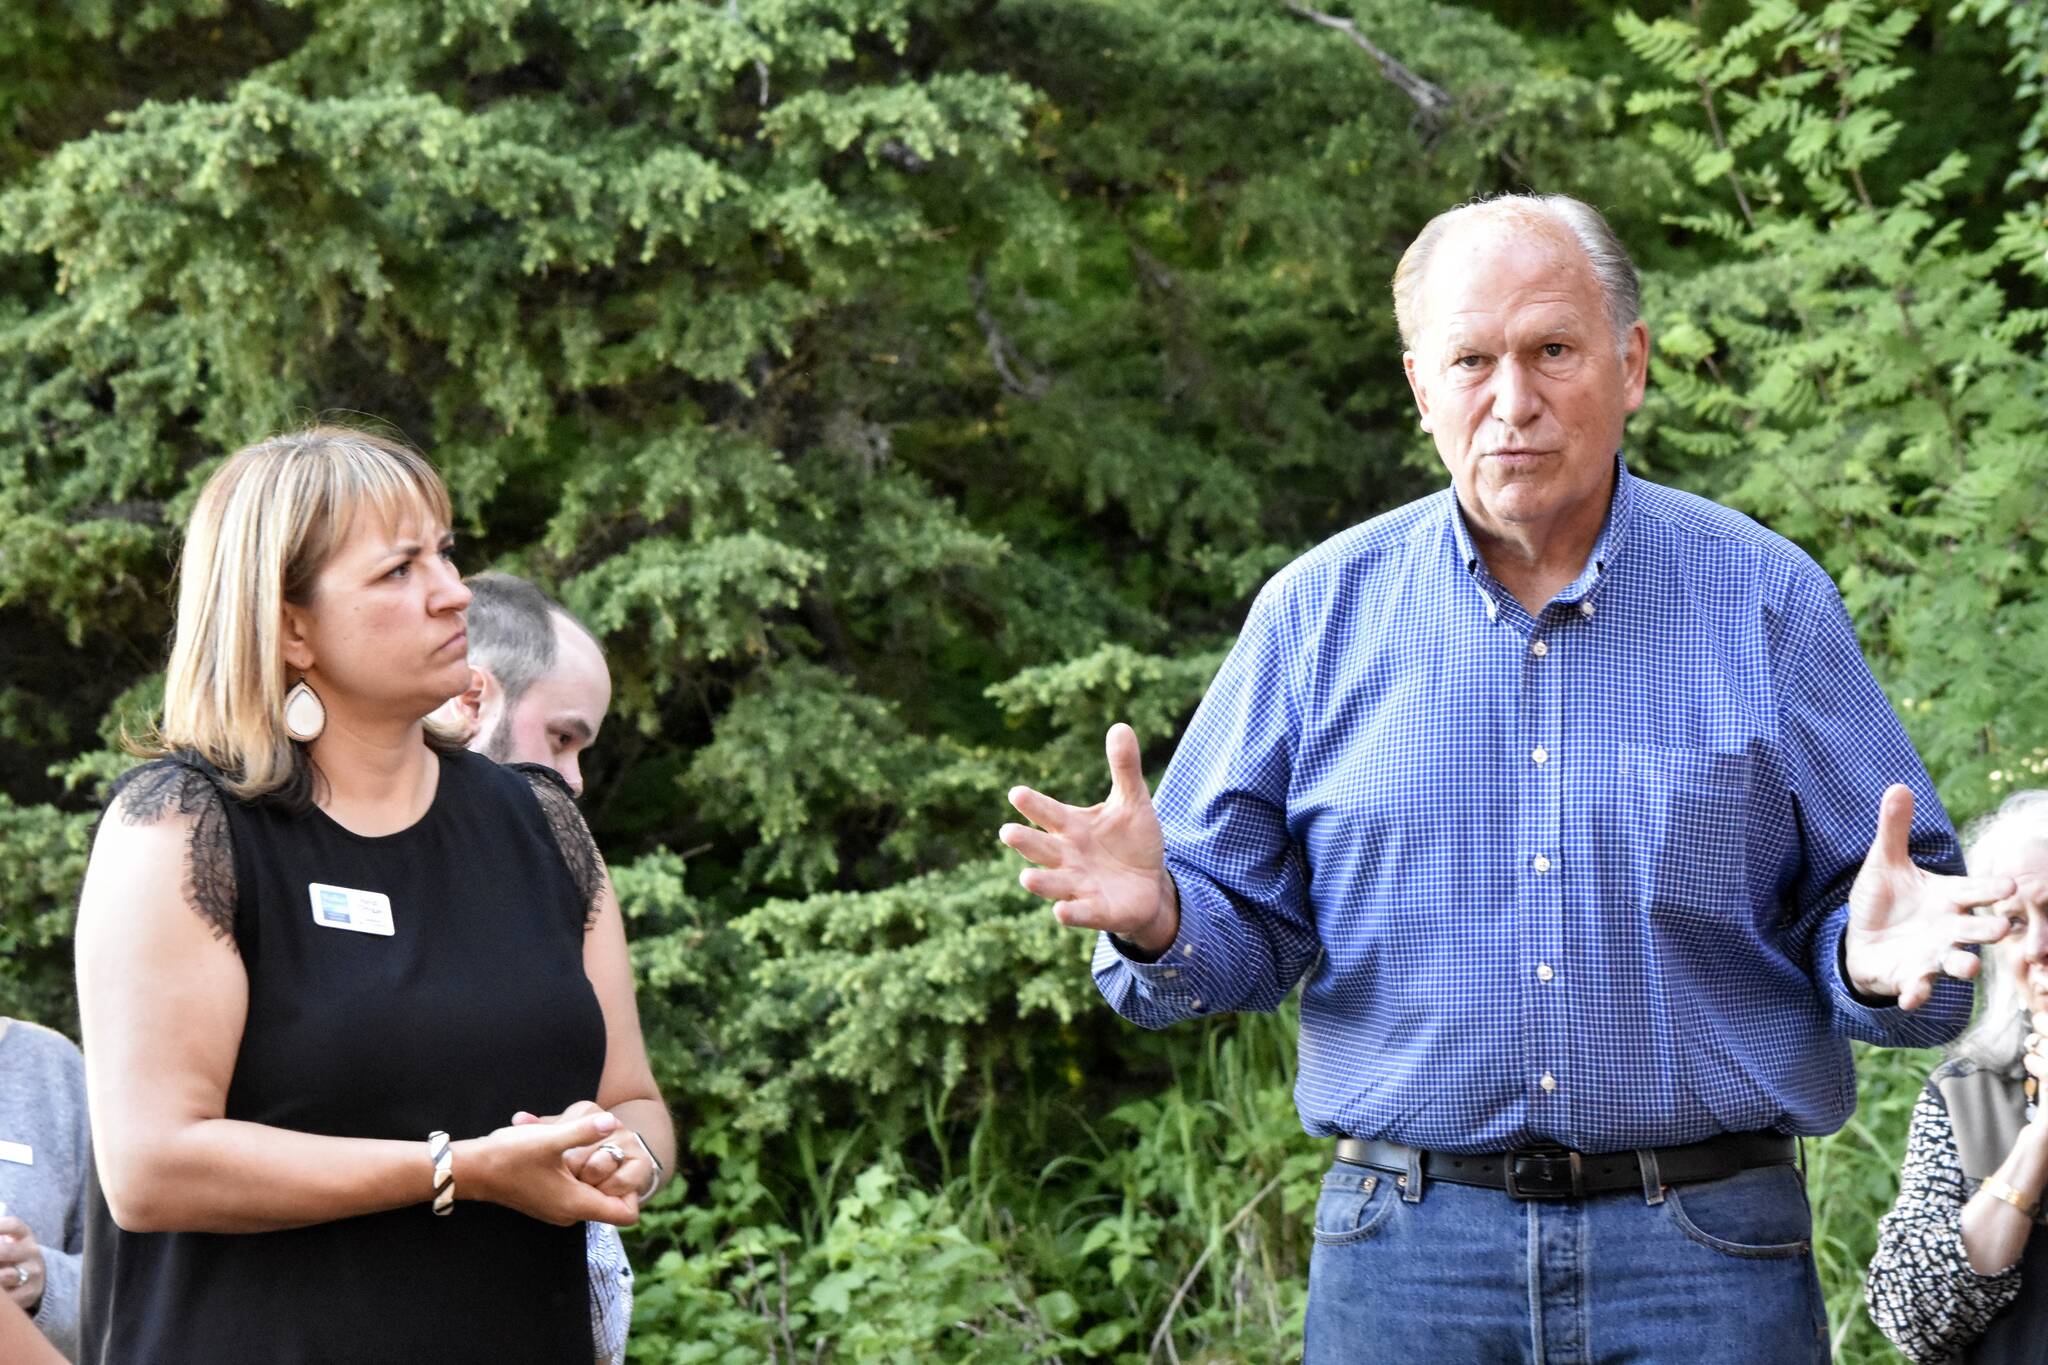 Former Gov. Bill Walker, right, and his running mate former commissioner of the Department of Labor and Workforce Development Heidi Drygas, speak to Juneauites gathered for a fundraiser at a private home in Juneau on Tuesday, June 7, 2022. (Peter Segall / Juneau Empire)